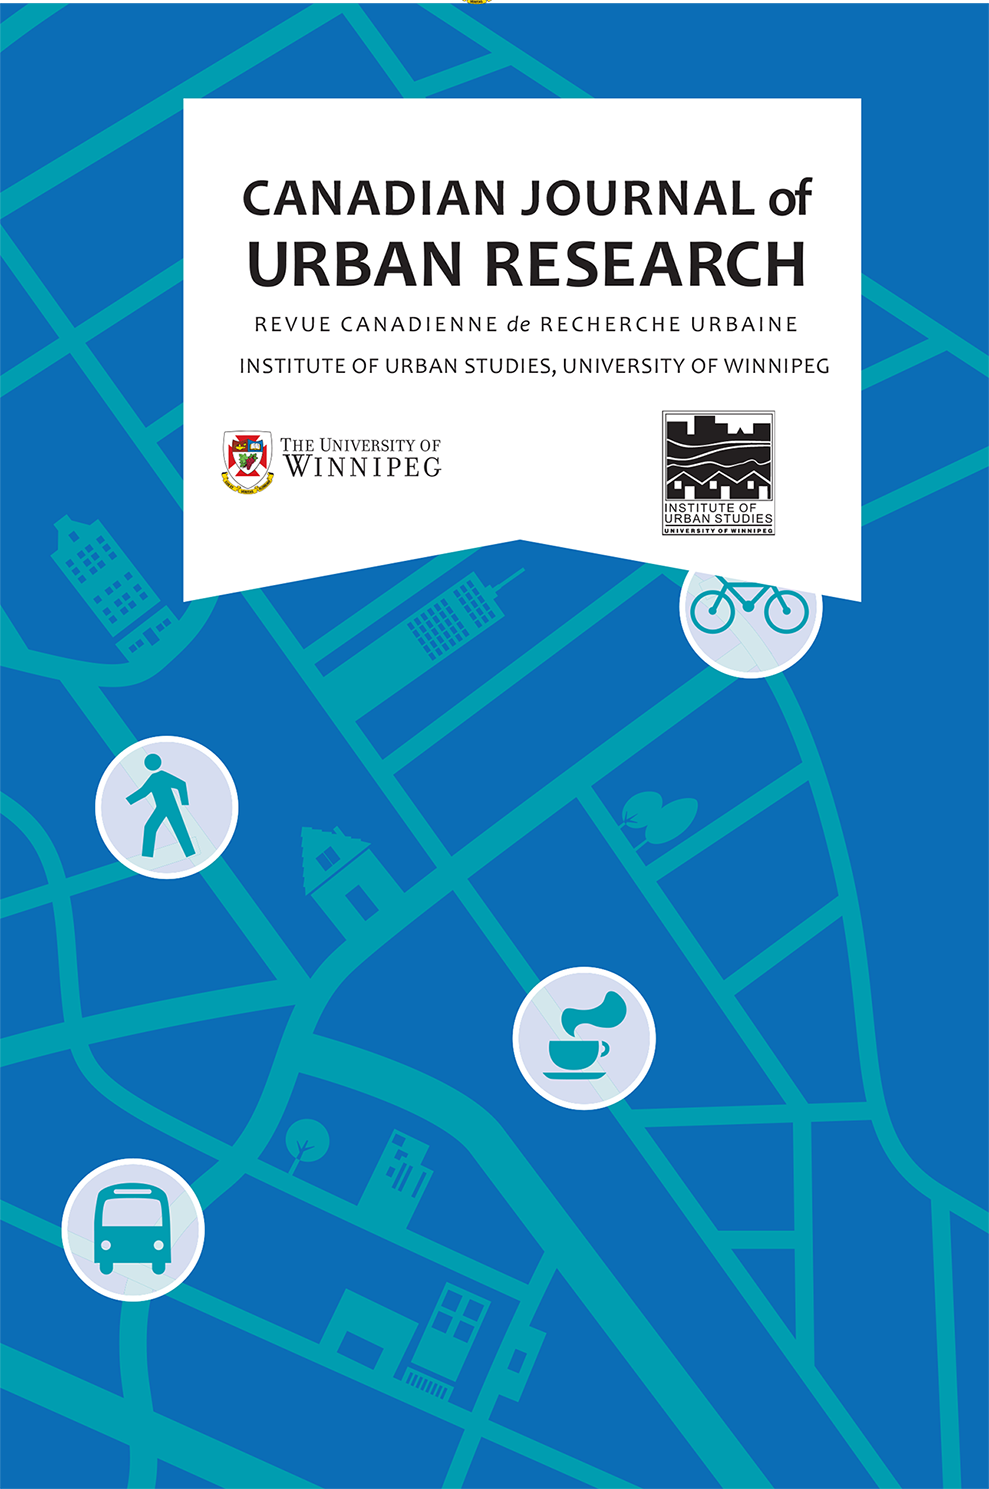 					View Vol. 27 No. 1 (2018): Canadian Journal of Urban Research - Summer 2018 Issue
				